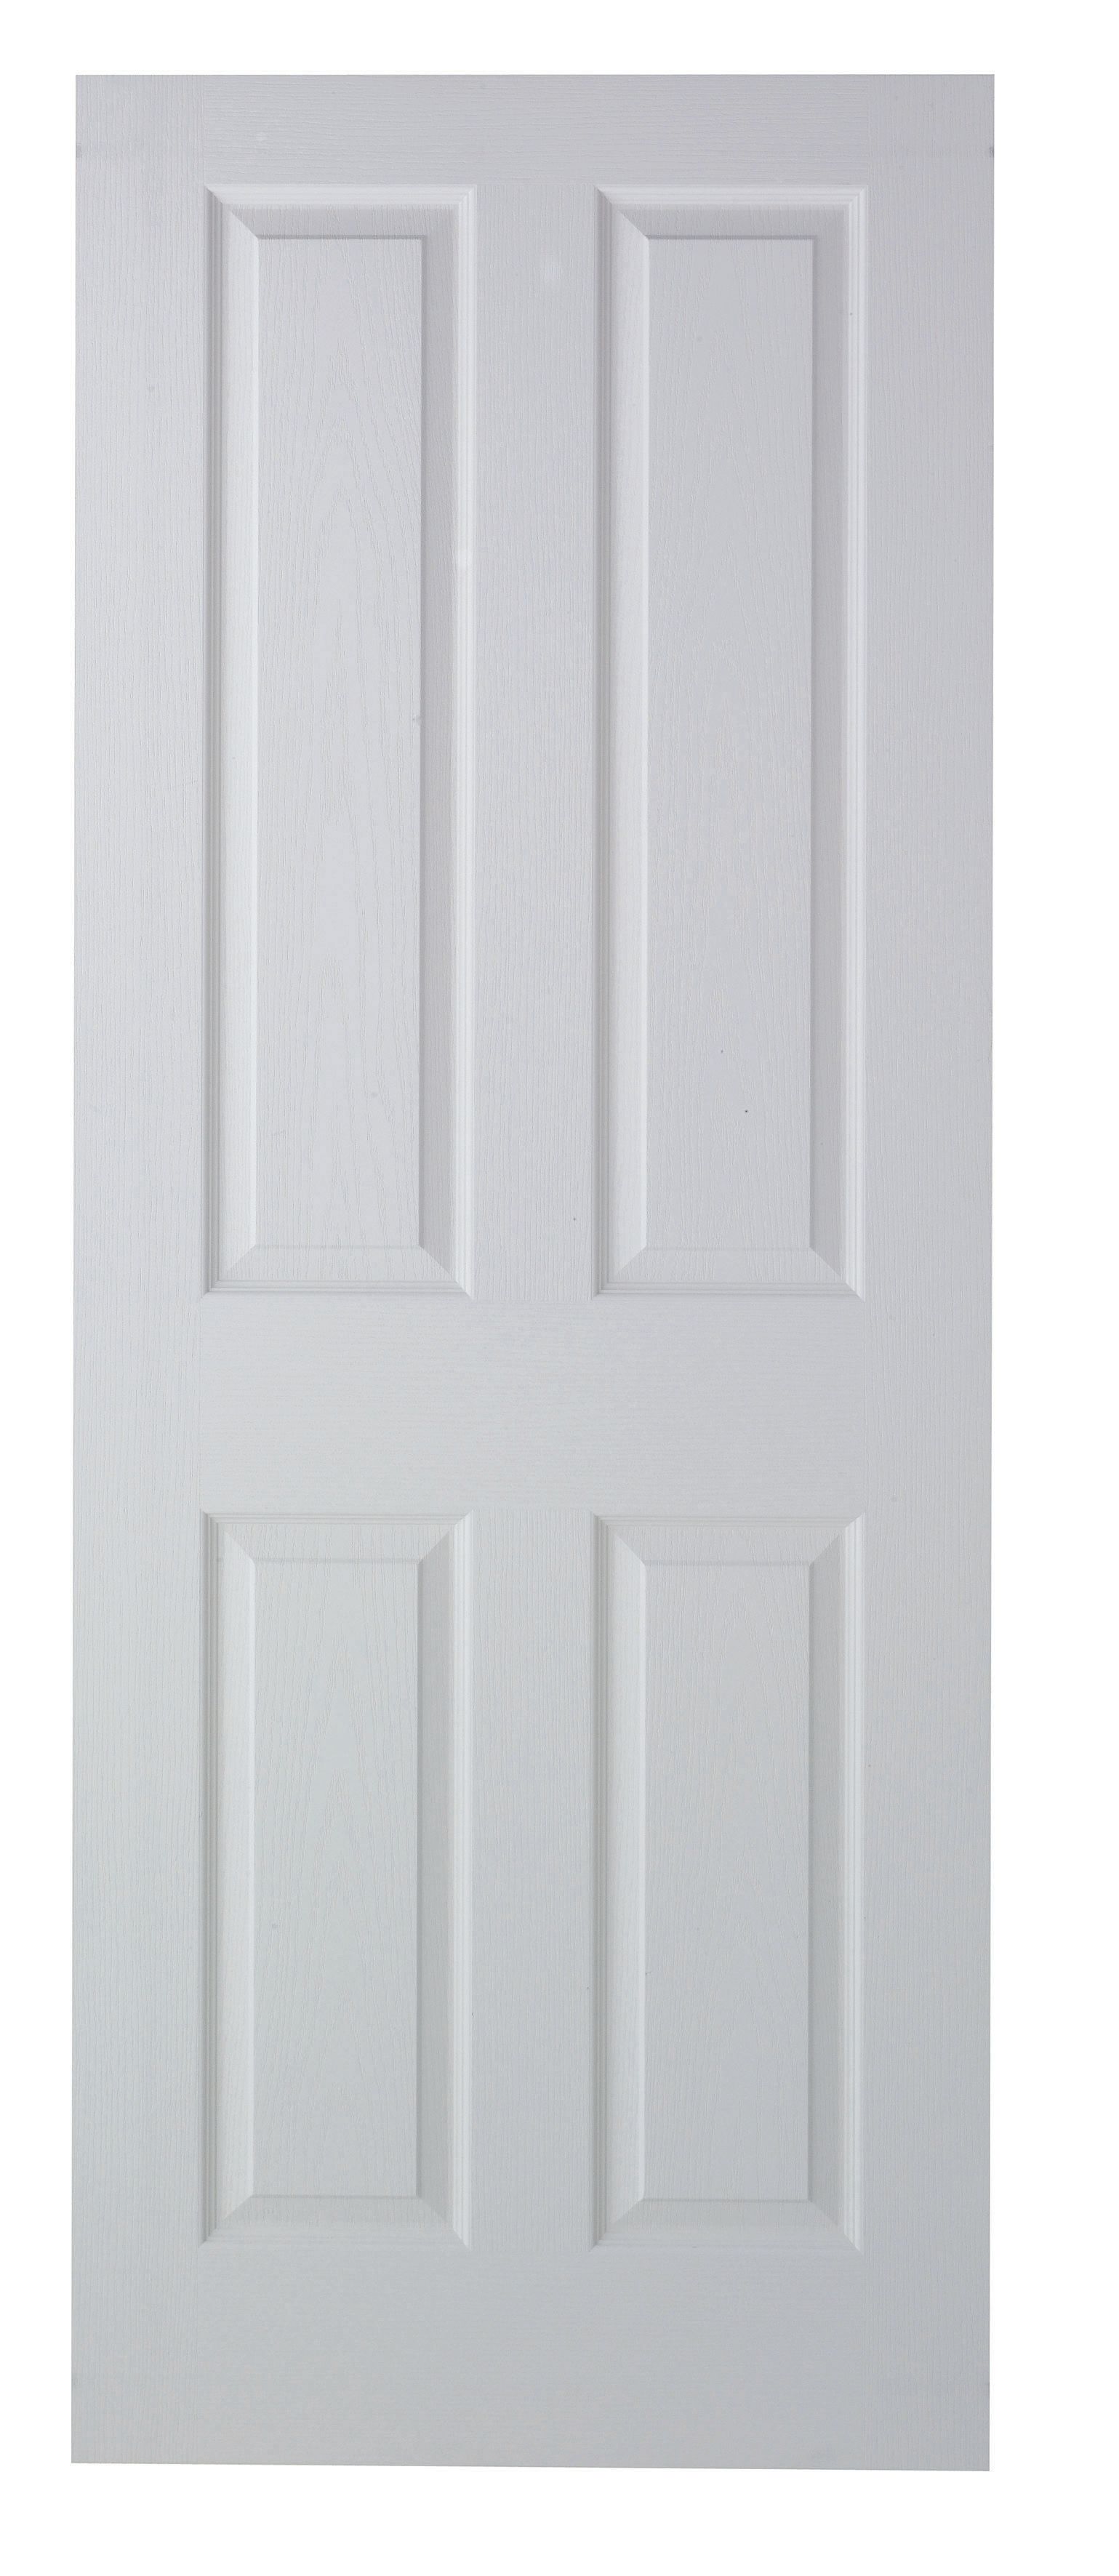 Wickes Stirling White Grained Moulded 4 Panel Internal Fire Door - 2040mm x 926mm